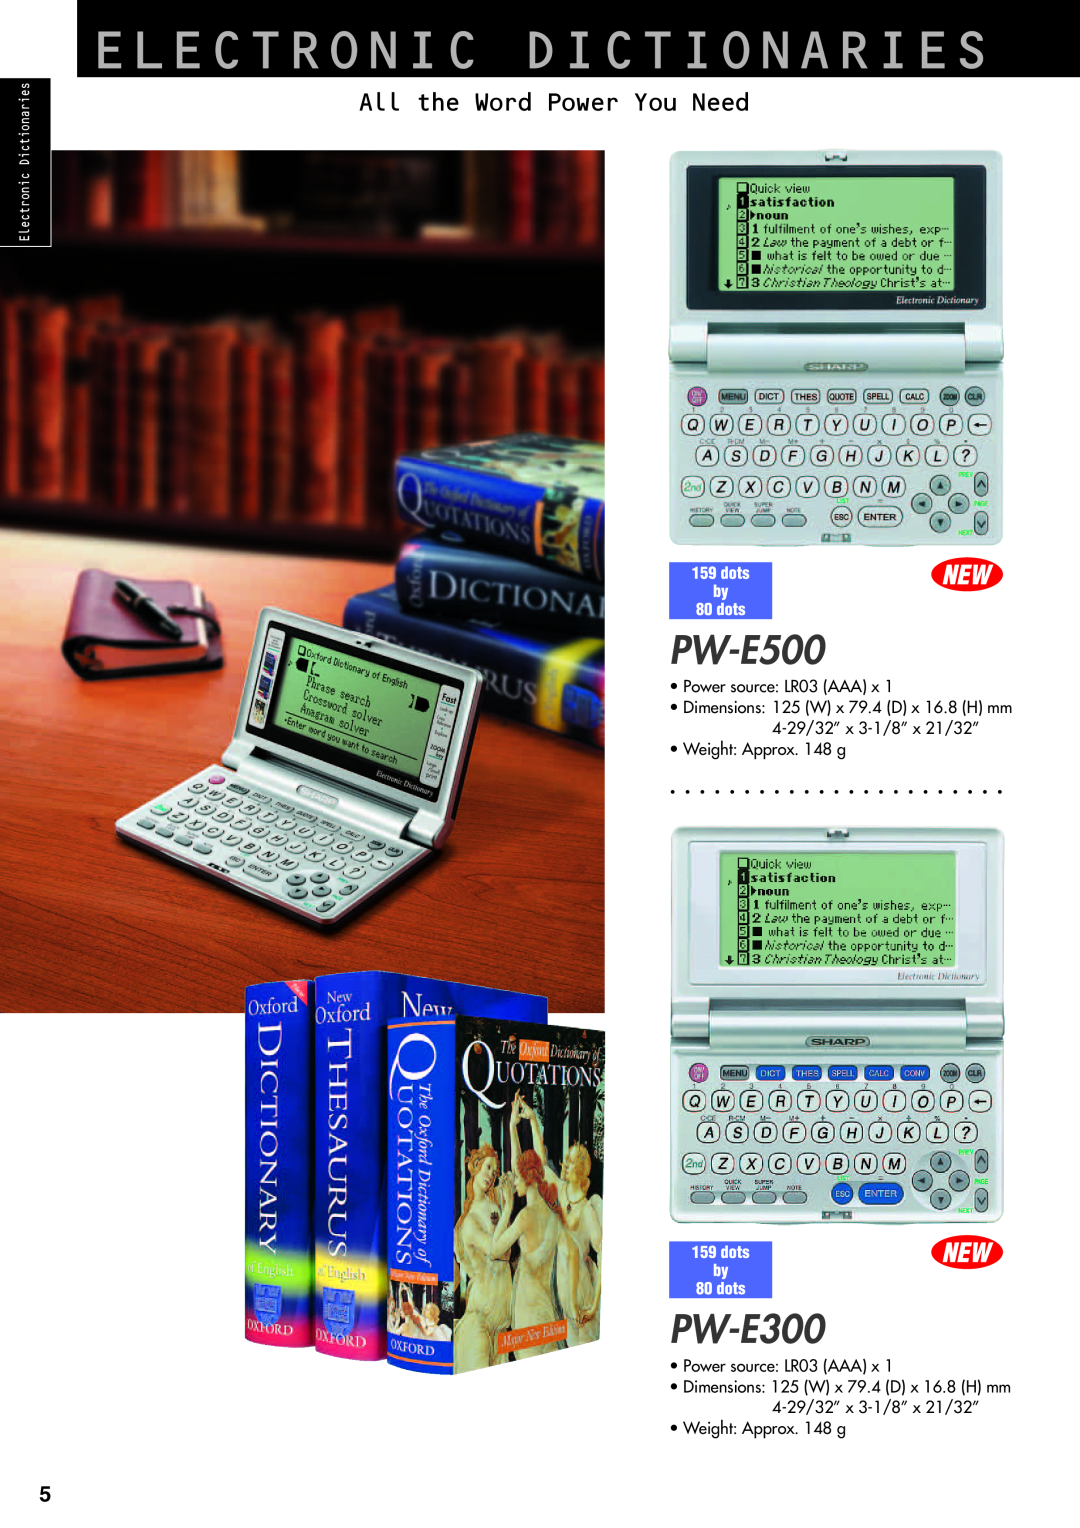 Sharp electronic calculator manual Electronic Dictionaries, PW-E500, PW-E300, All the Word Power You Need 